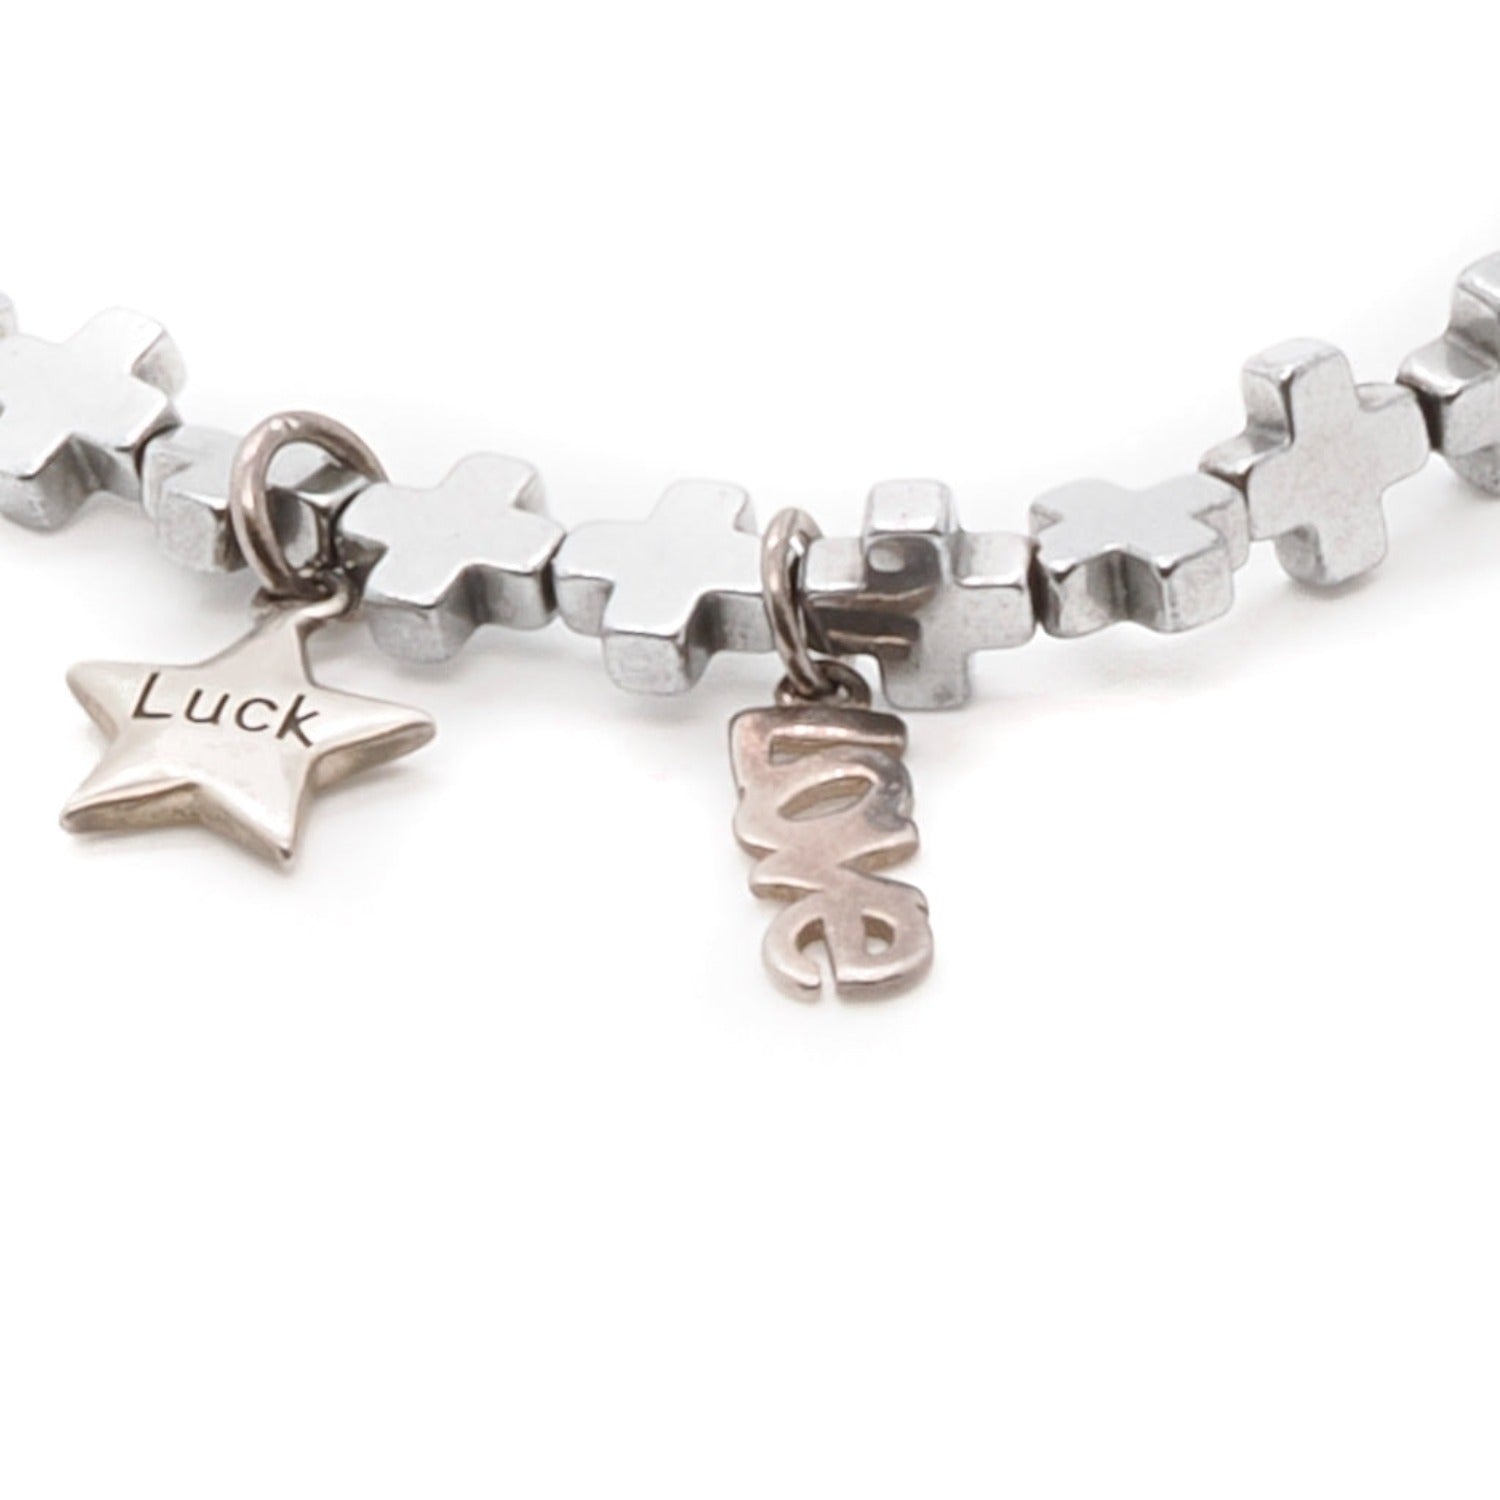 Explore the symbolism of the Silver Color Lucky Charms Bracelet, showcasing its sterling silver lucky charms and red enamel horseshoe symbol bead.